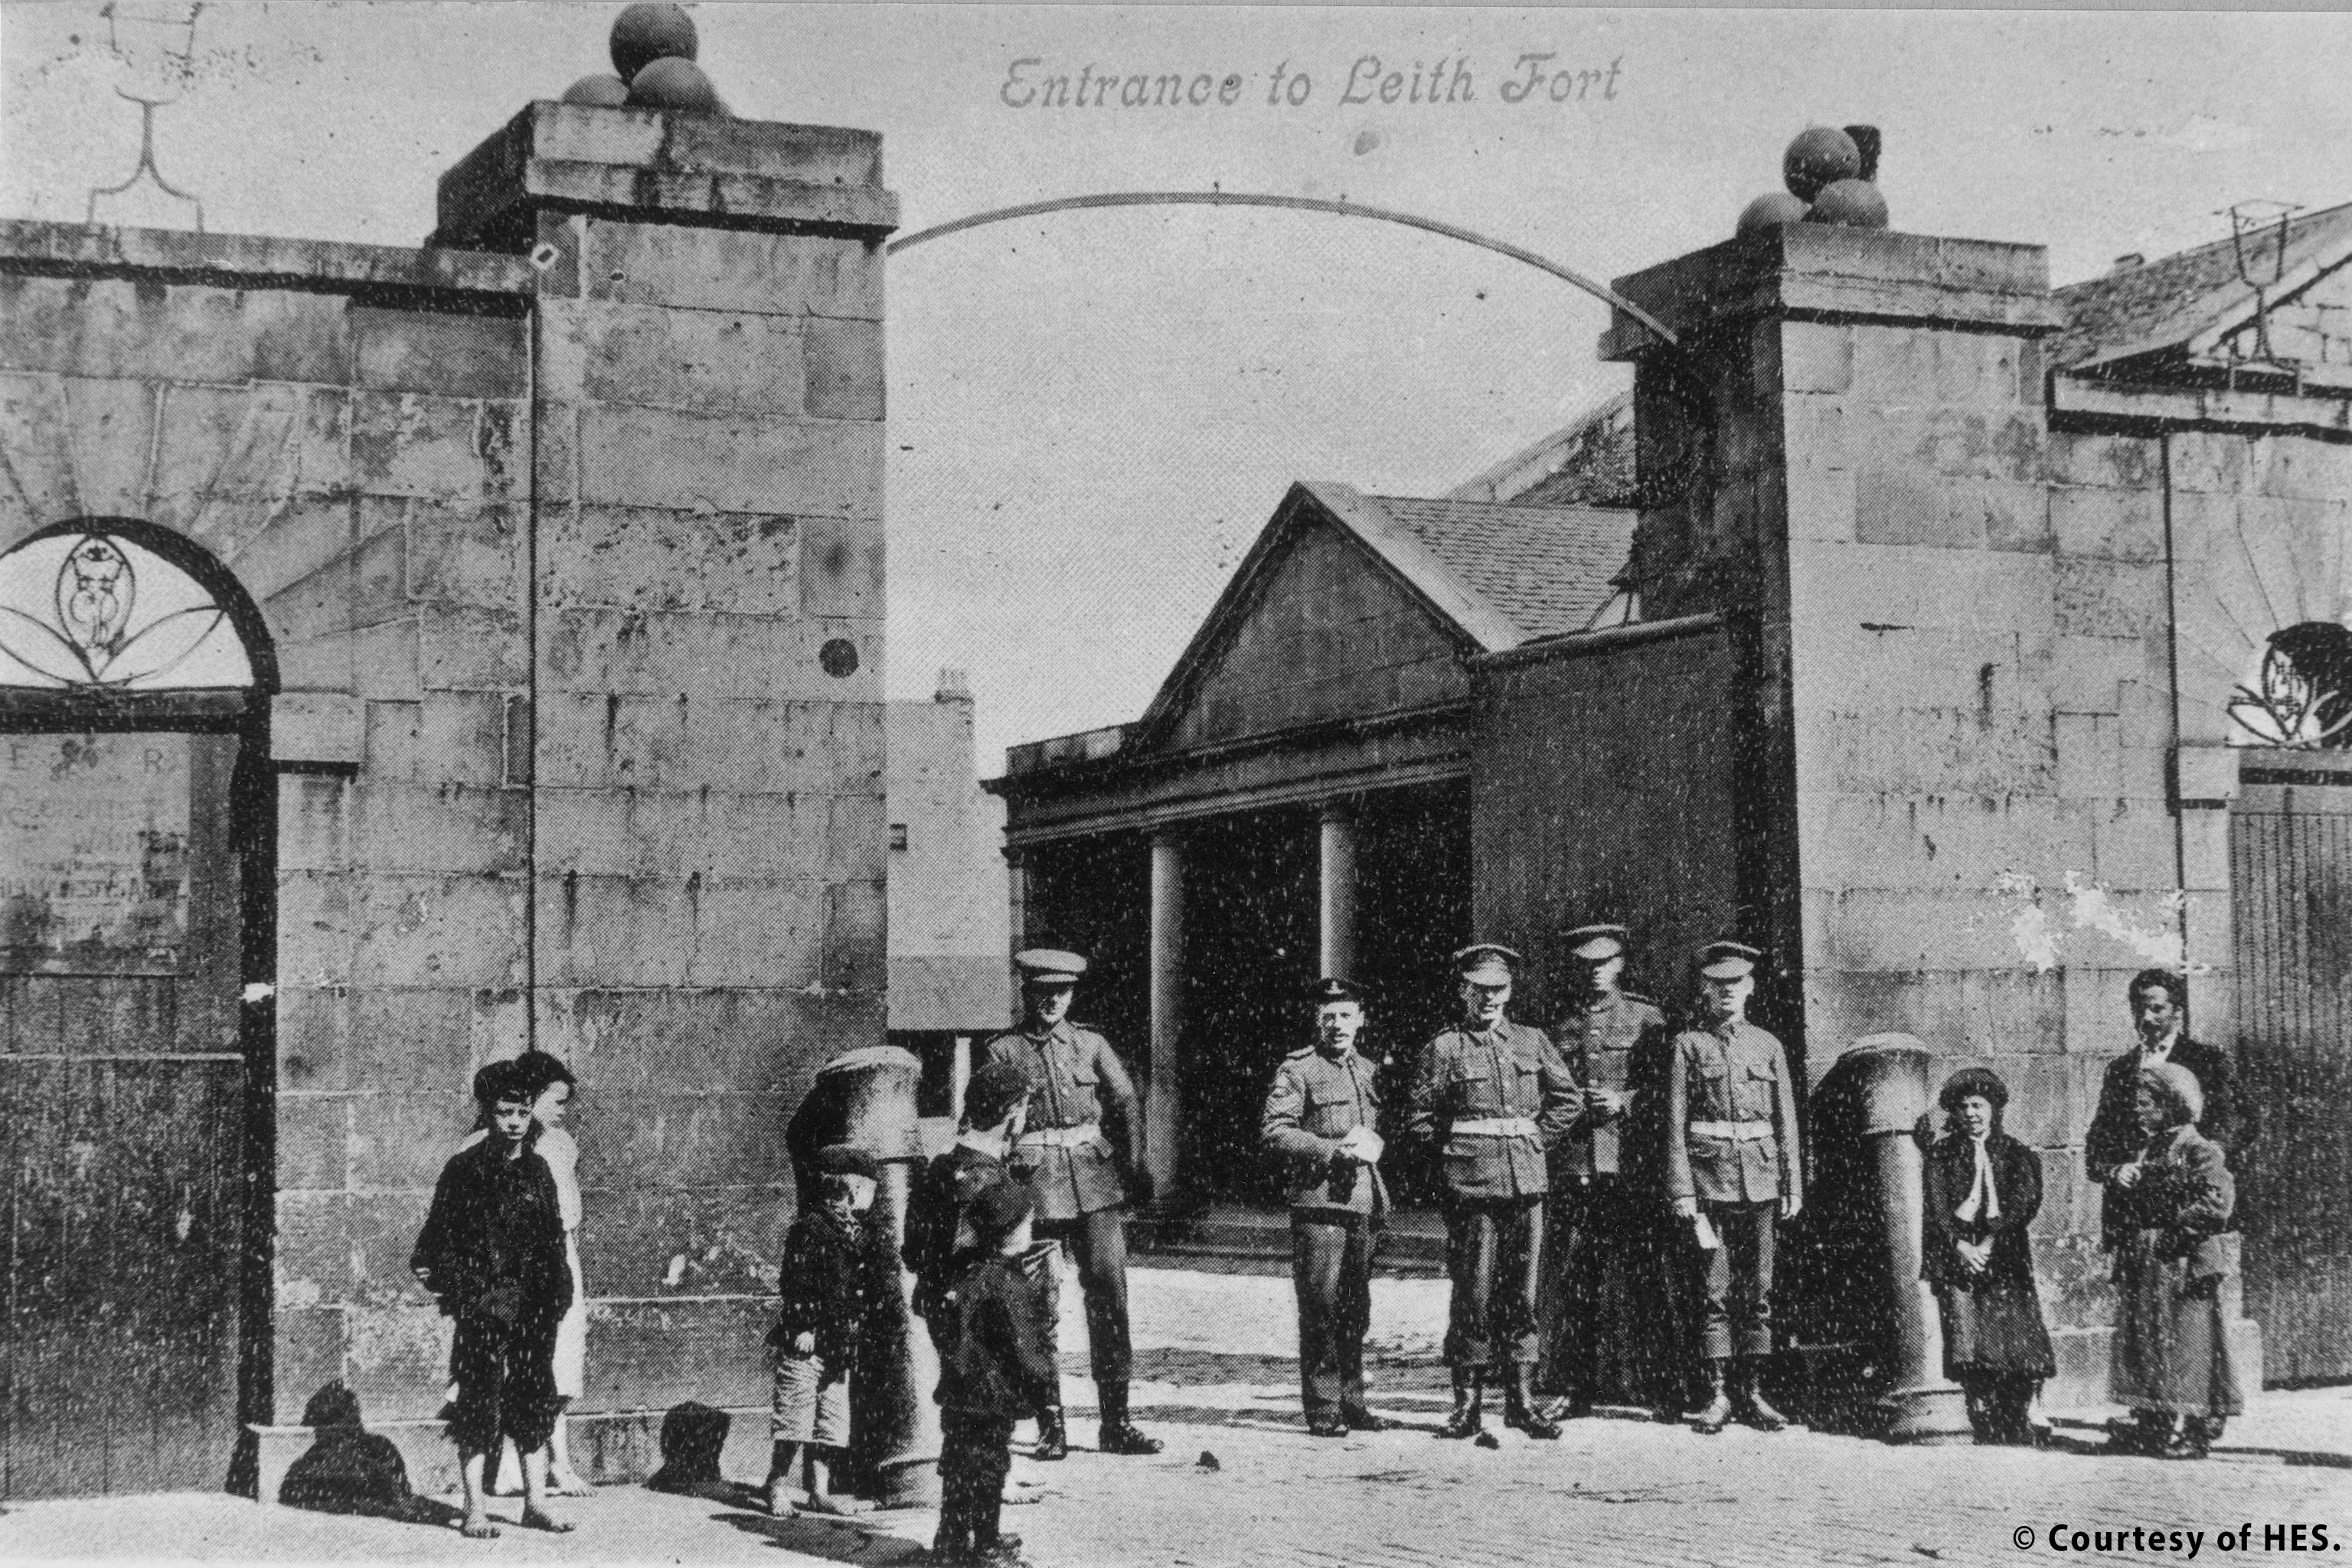 An archive image of the entrance to Leith fort. A large stone gateway is open showing a glimpse of fort buildings. Five soldiers in uniform are standing in the gateway. A number of local children are standing nearby. 